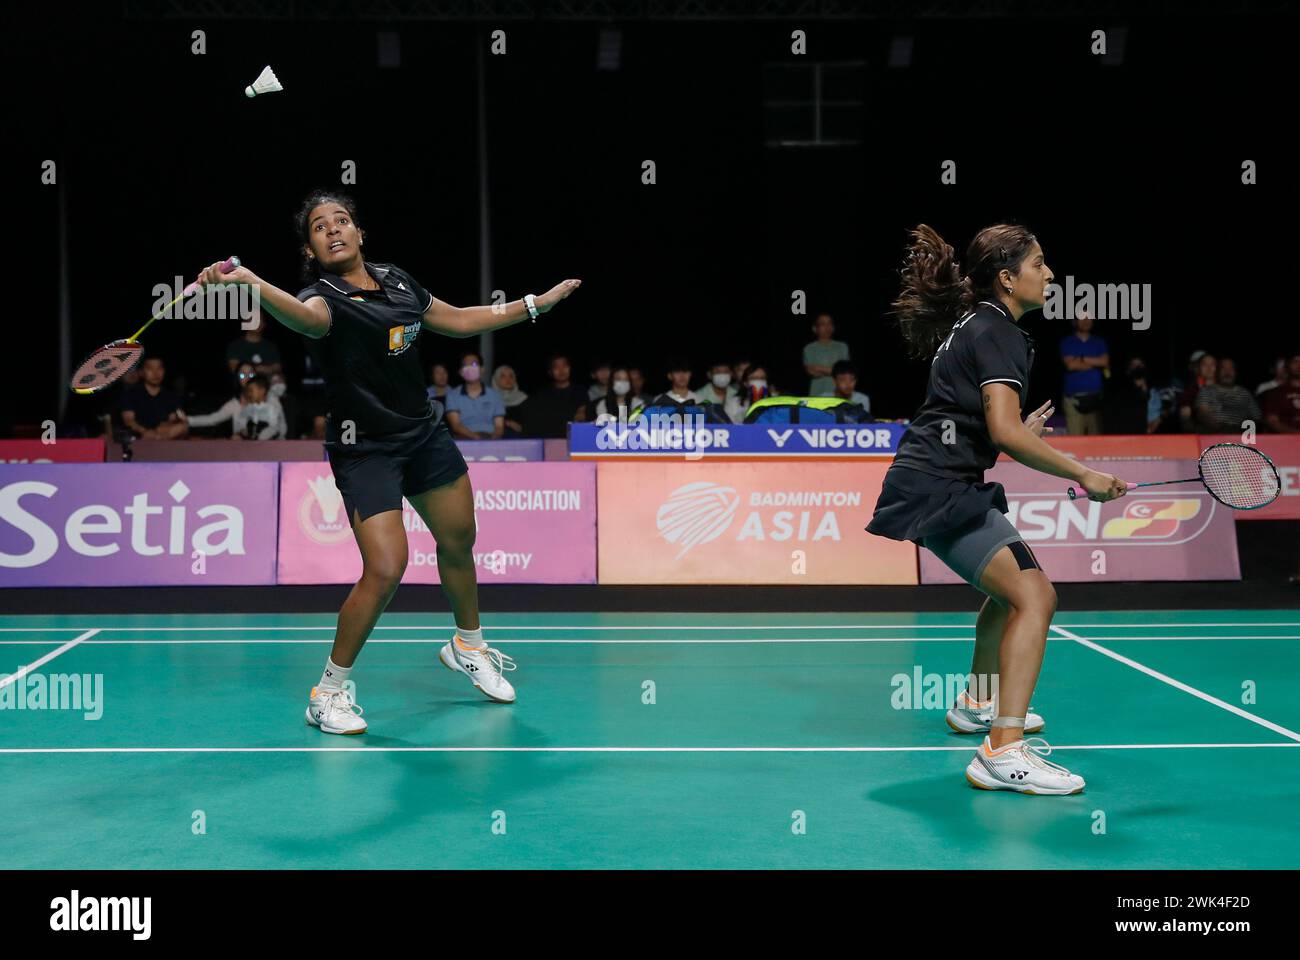 Kuala Lumpur, Malaysia. 18th Feb, 2024. Gayatri Gopichand Pullela and Treesa Jolly (L) of India in action against Jongkolphan Kititharakul and Rawinda Projongjai of Thailand (not pictured) during the Women's Doubles final match at the Badminton Asia Team Championships 2024 at Setia City Convention Centre in Shah Alam. Gayatri Gopichand Pullela and Treesa Jolly won with scores; 21/18/21 : 16/21/16. (Photo by Wong Fok Loy/SOPA Images/Sipa USA) Credit: Sipa USA/Alamy Live News Stock Photo